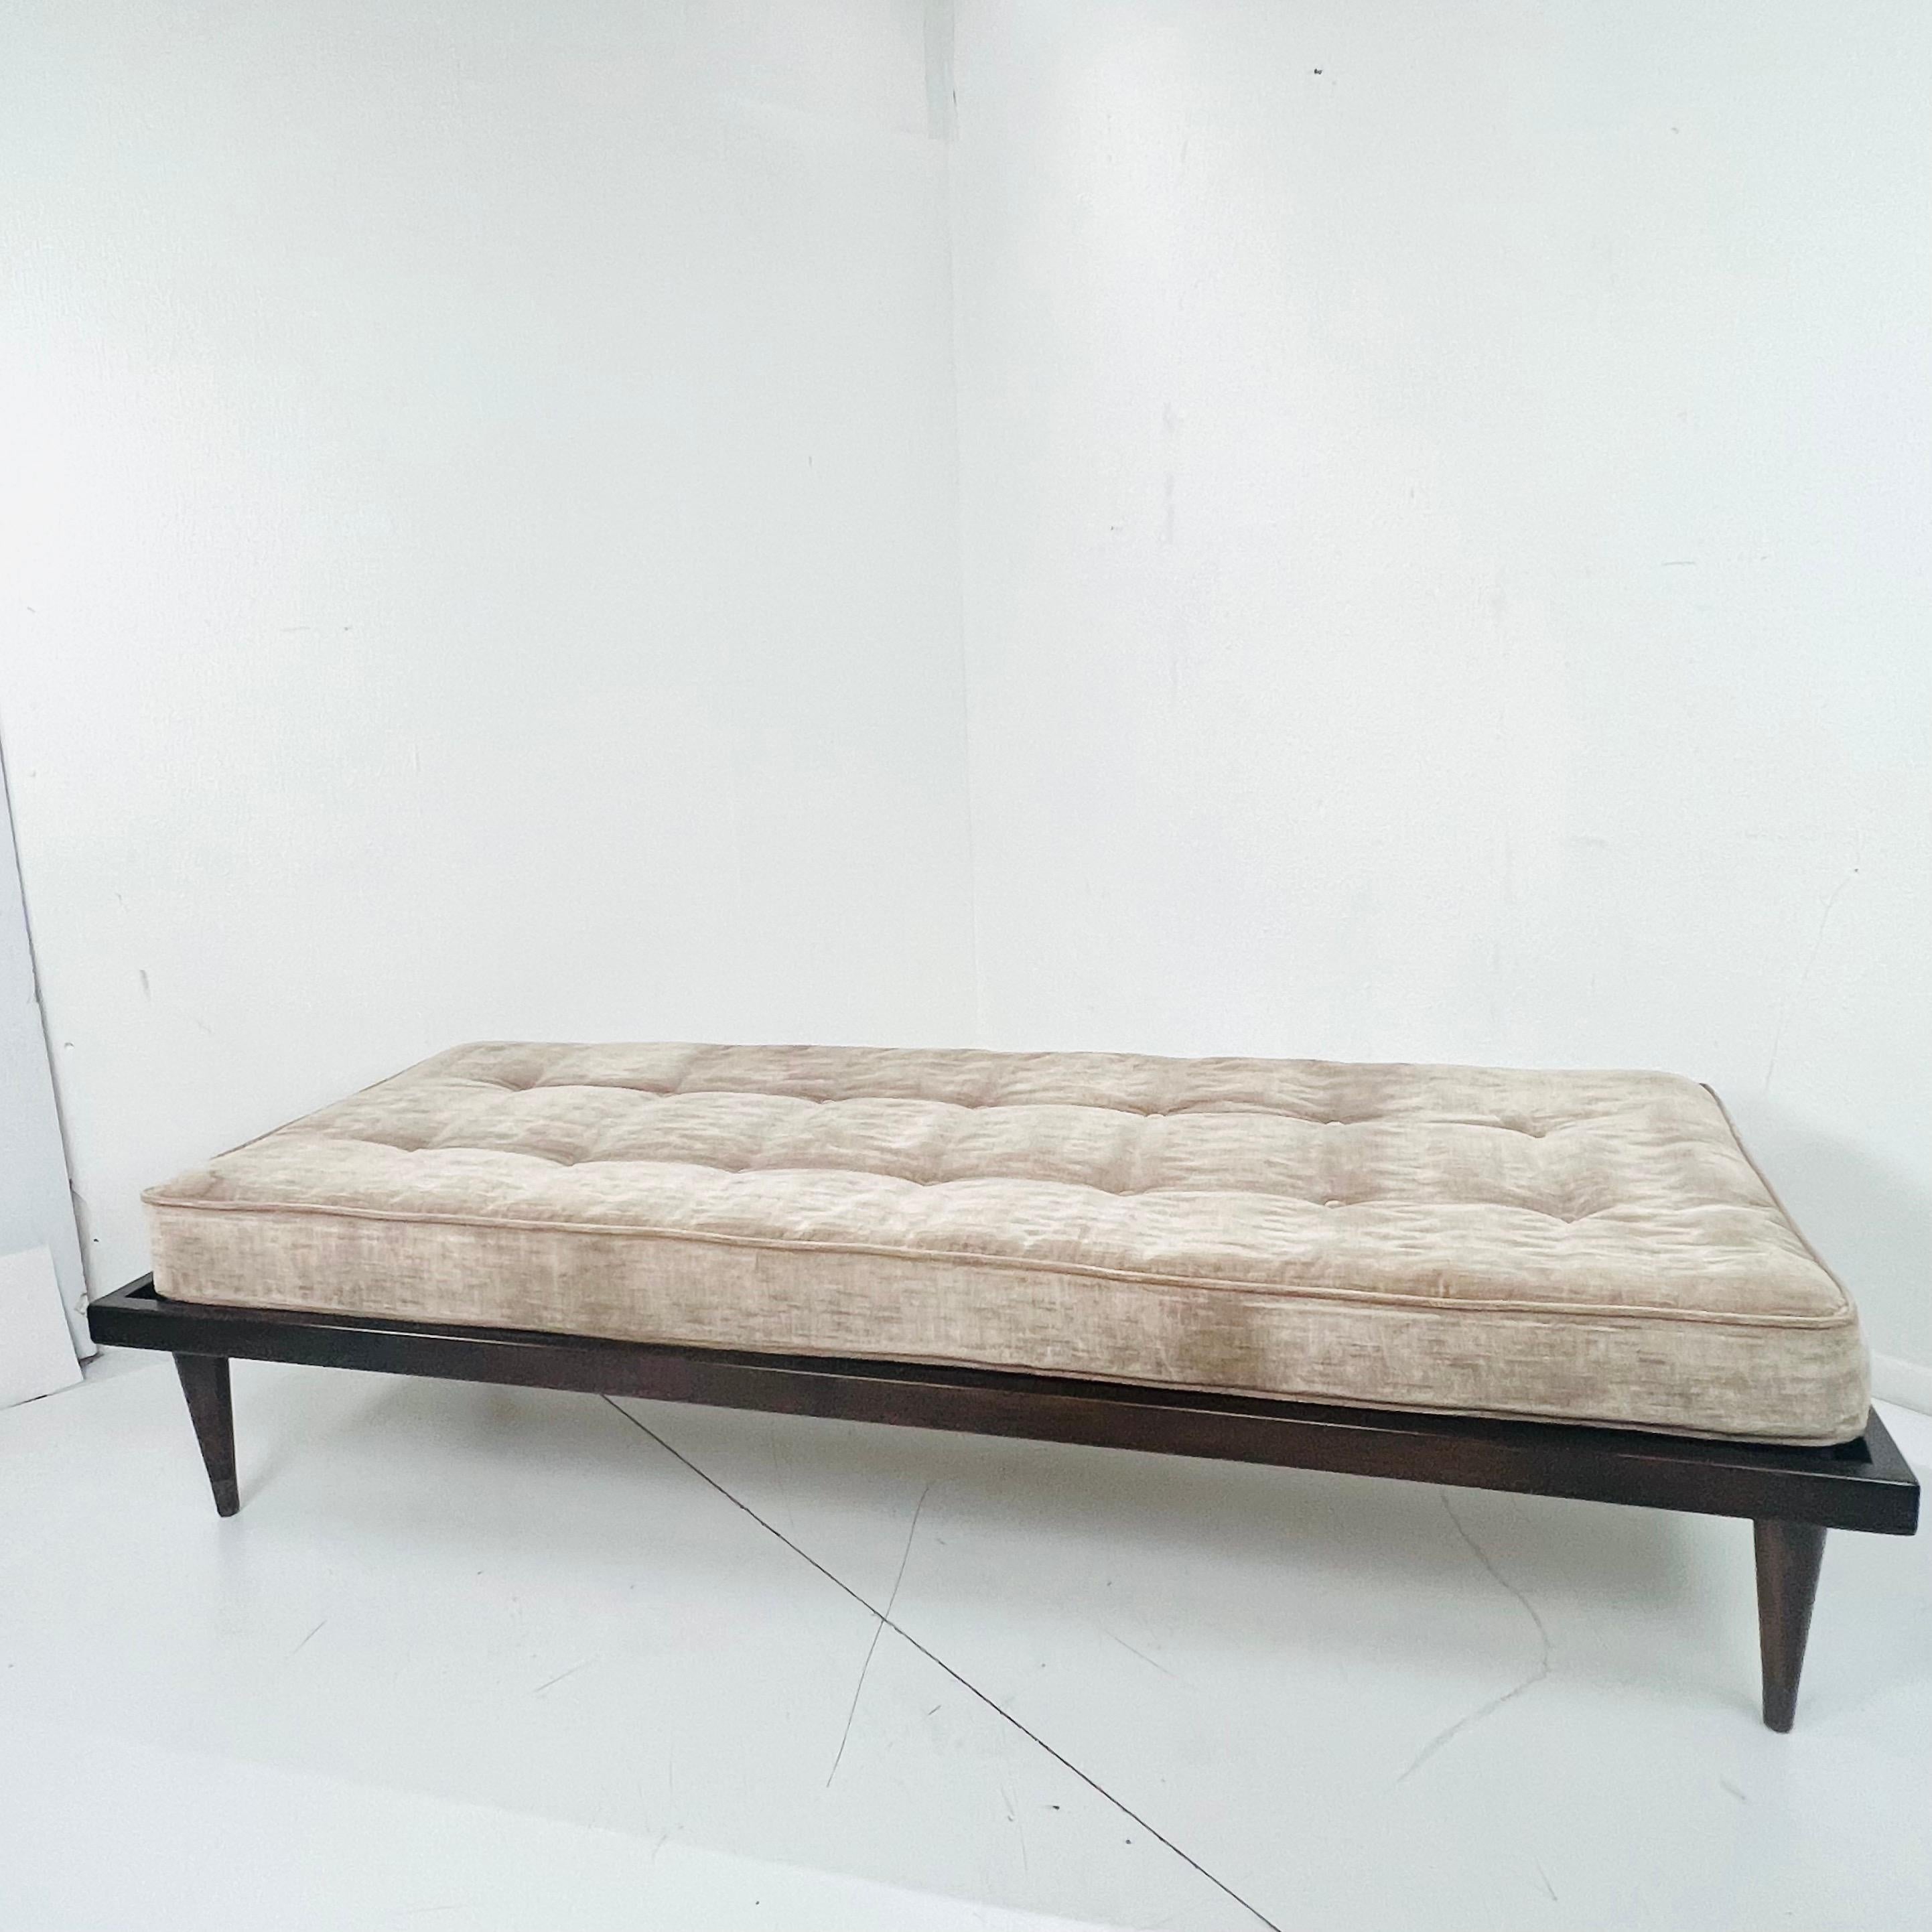 Simple and elegant vintage MCM daybed comprised of teak wood frame supporting a tufted upholstered cushion. Sturdy and in good vintage condition; cushion is stained on one side, reupholstery is recommended. 